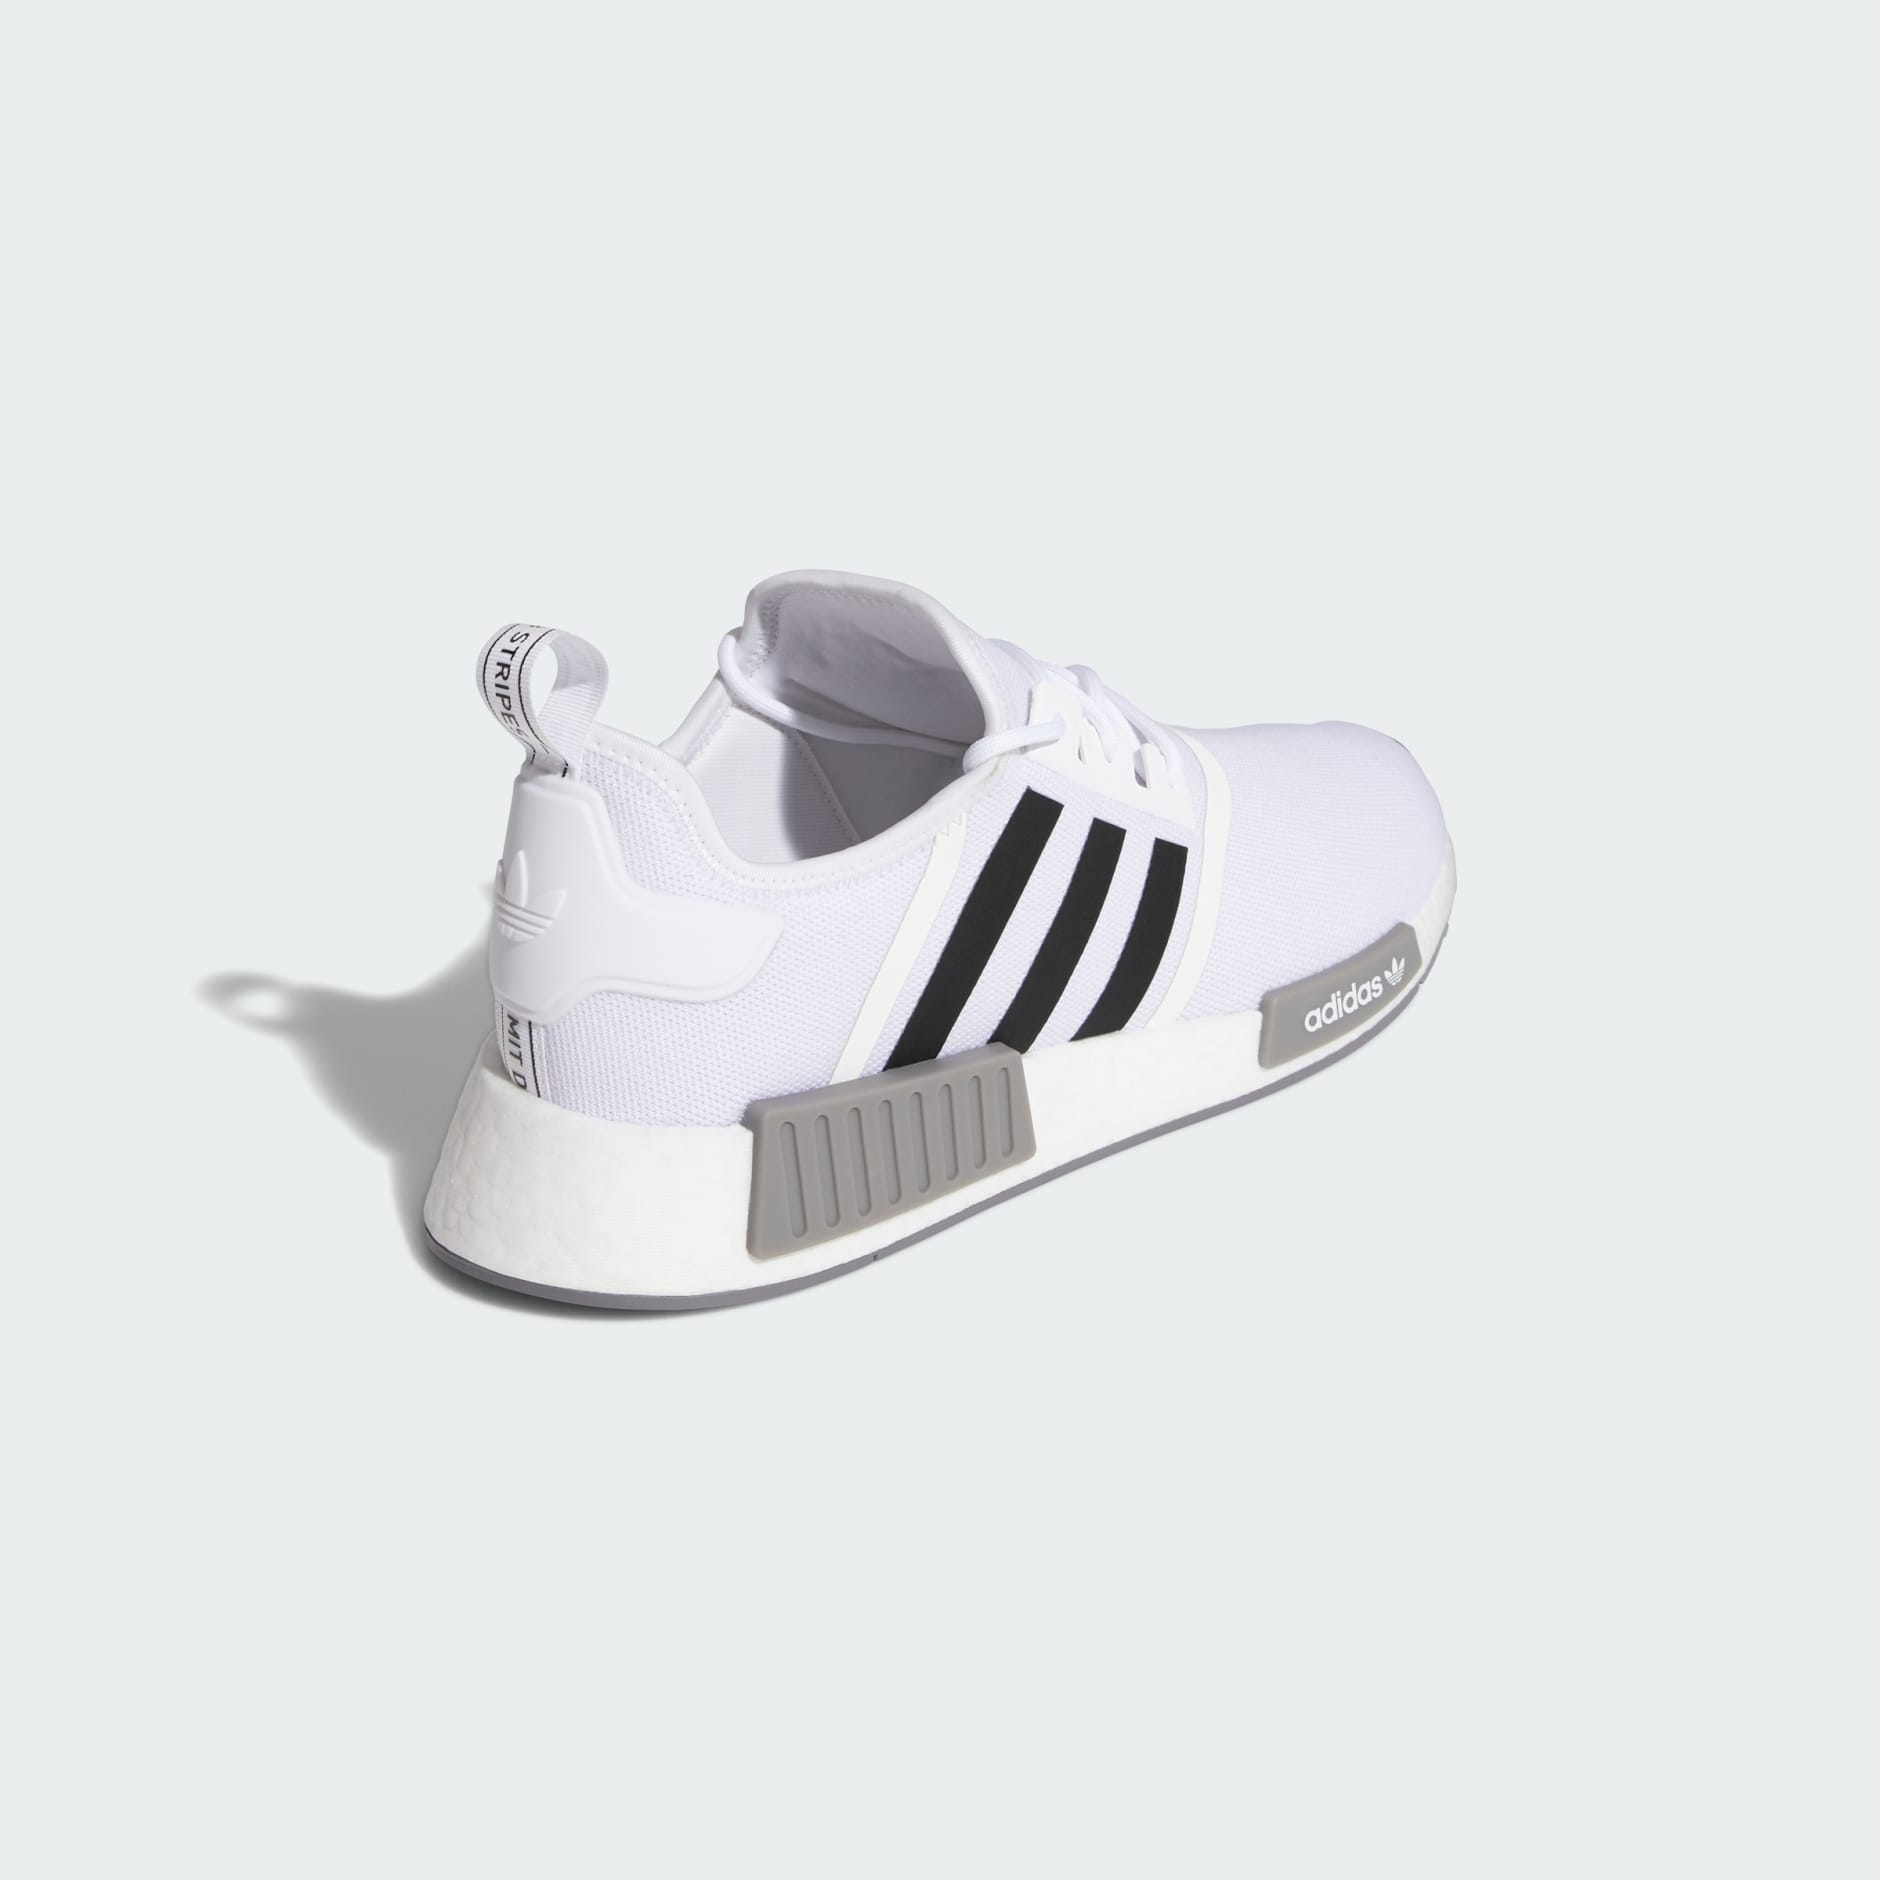 adidas X Rich Mnisi Nmd R1 Low-top Sneakers in White